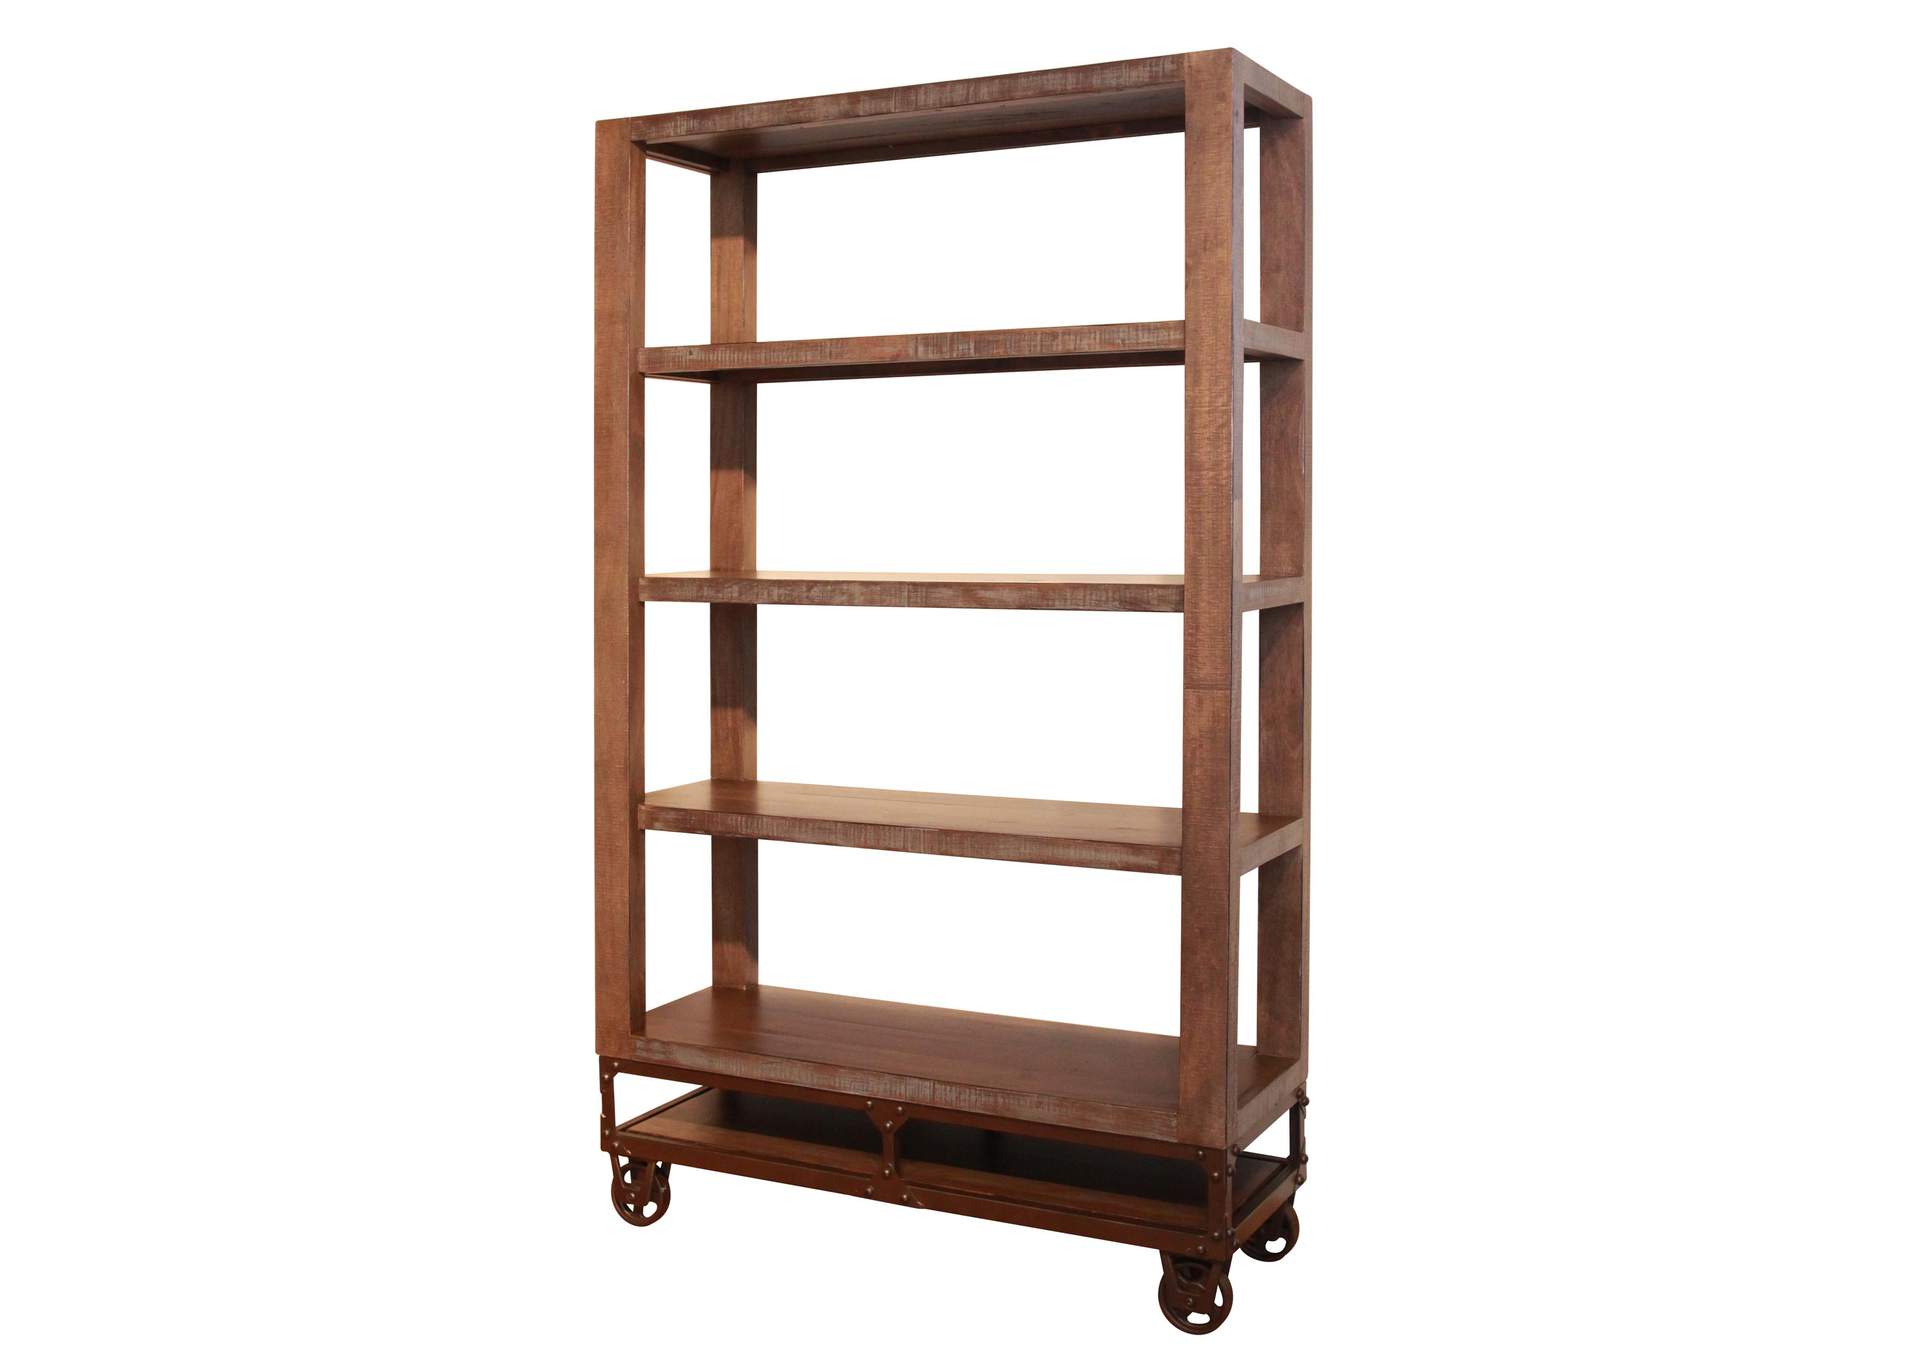 Urban Gold 70" Bookcase with 4 shelves & Casters,International Furniture Direct